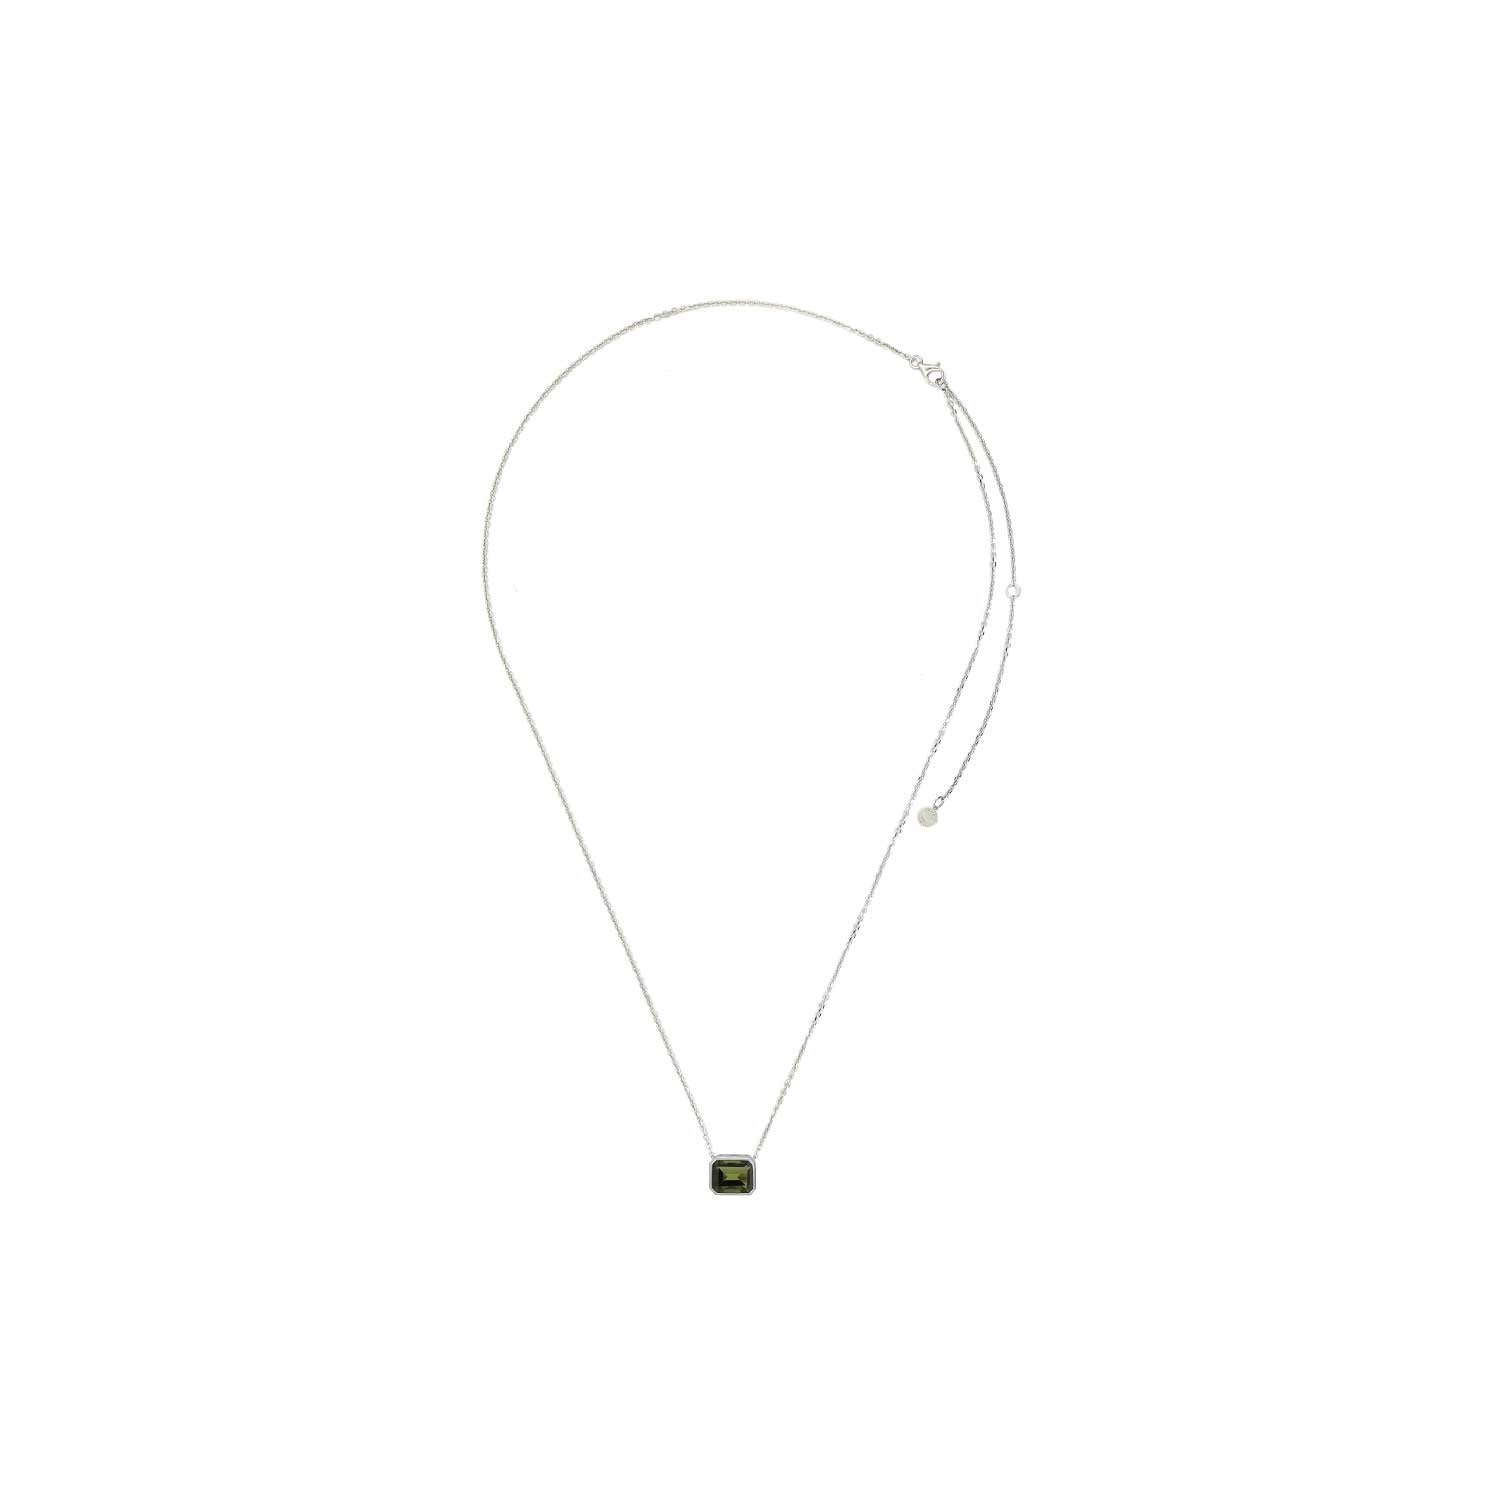 hue_cue_necklace_14k_white_gold_3